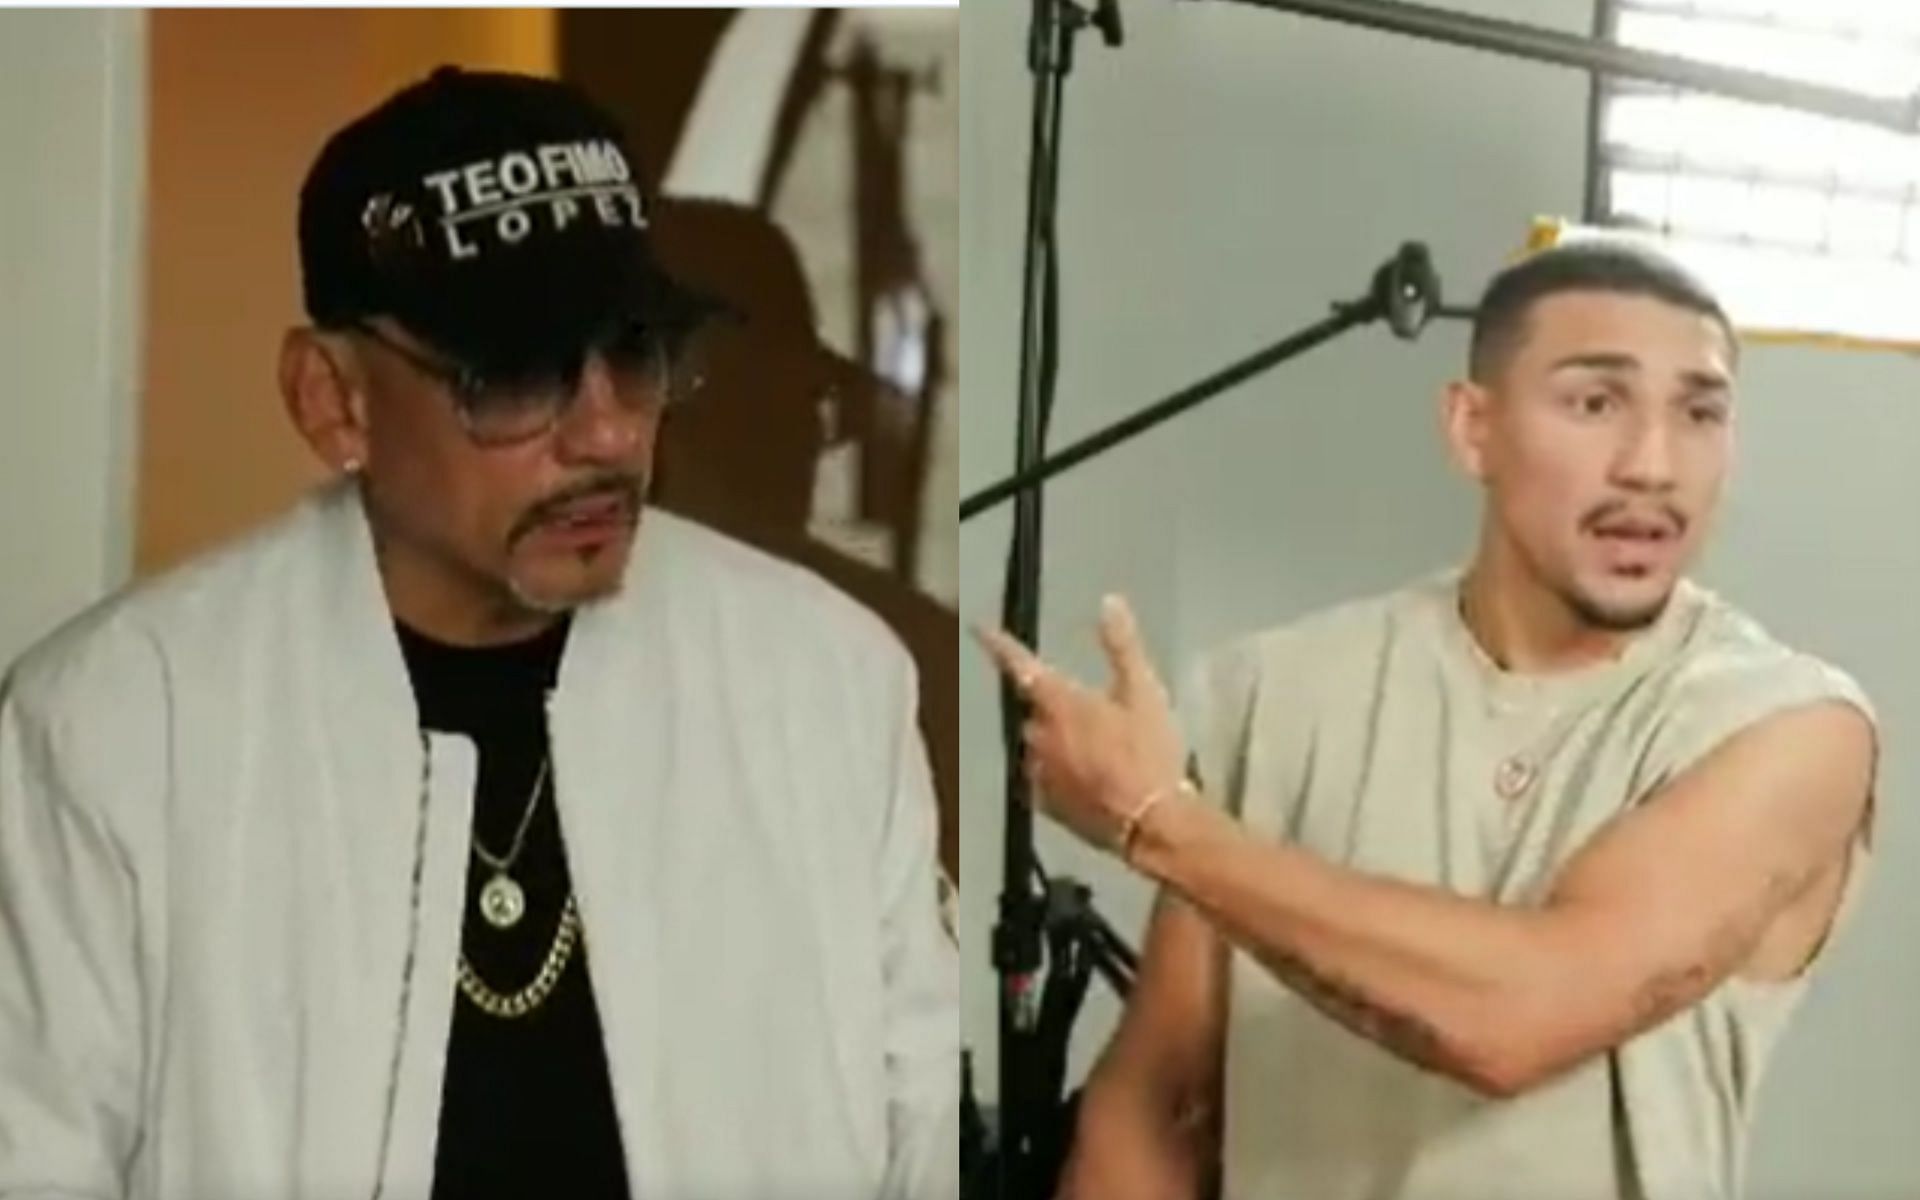 [Image from ESPN interview with Teofimo Lopez].